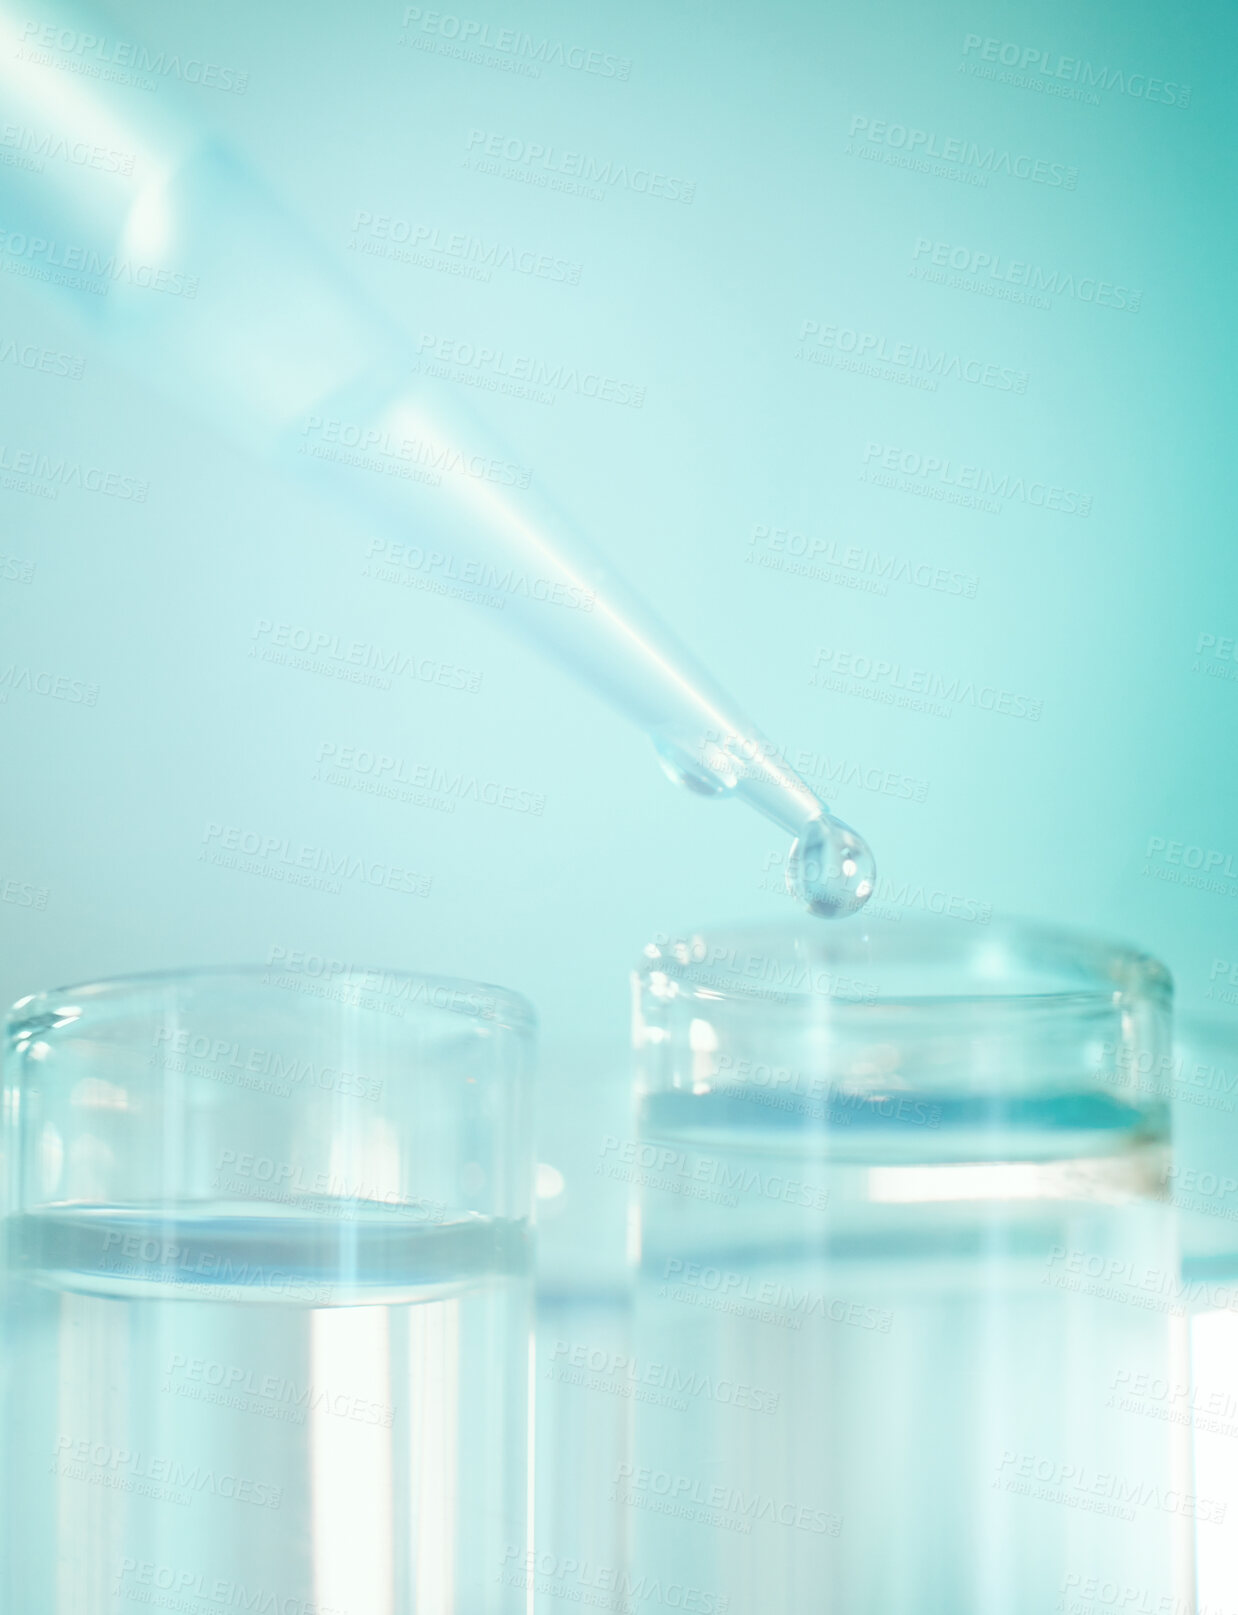 Buy stock photo Shot of a dropper and beakers in a laboratory